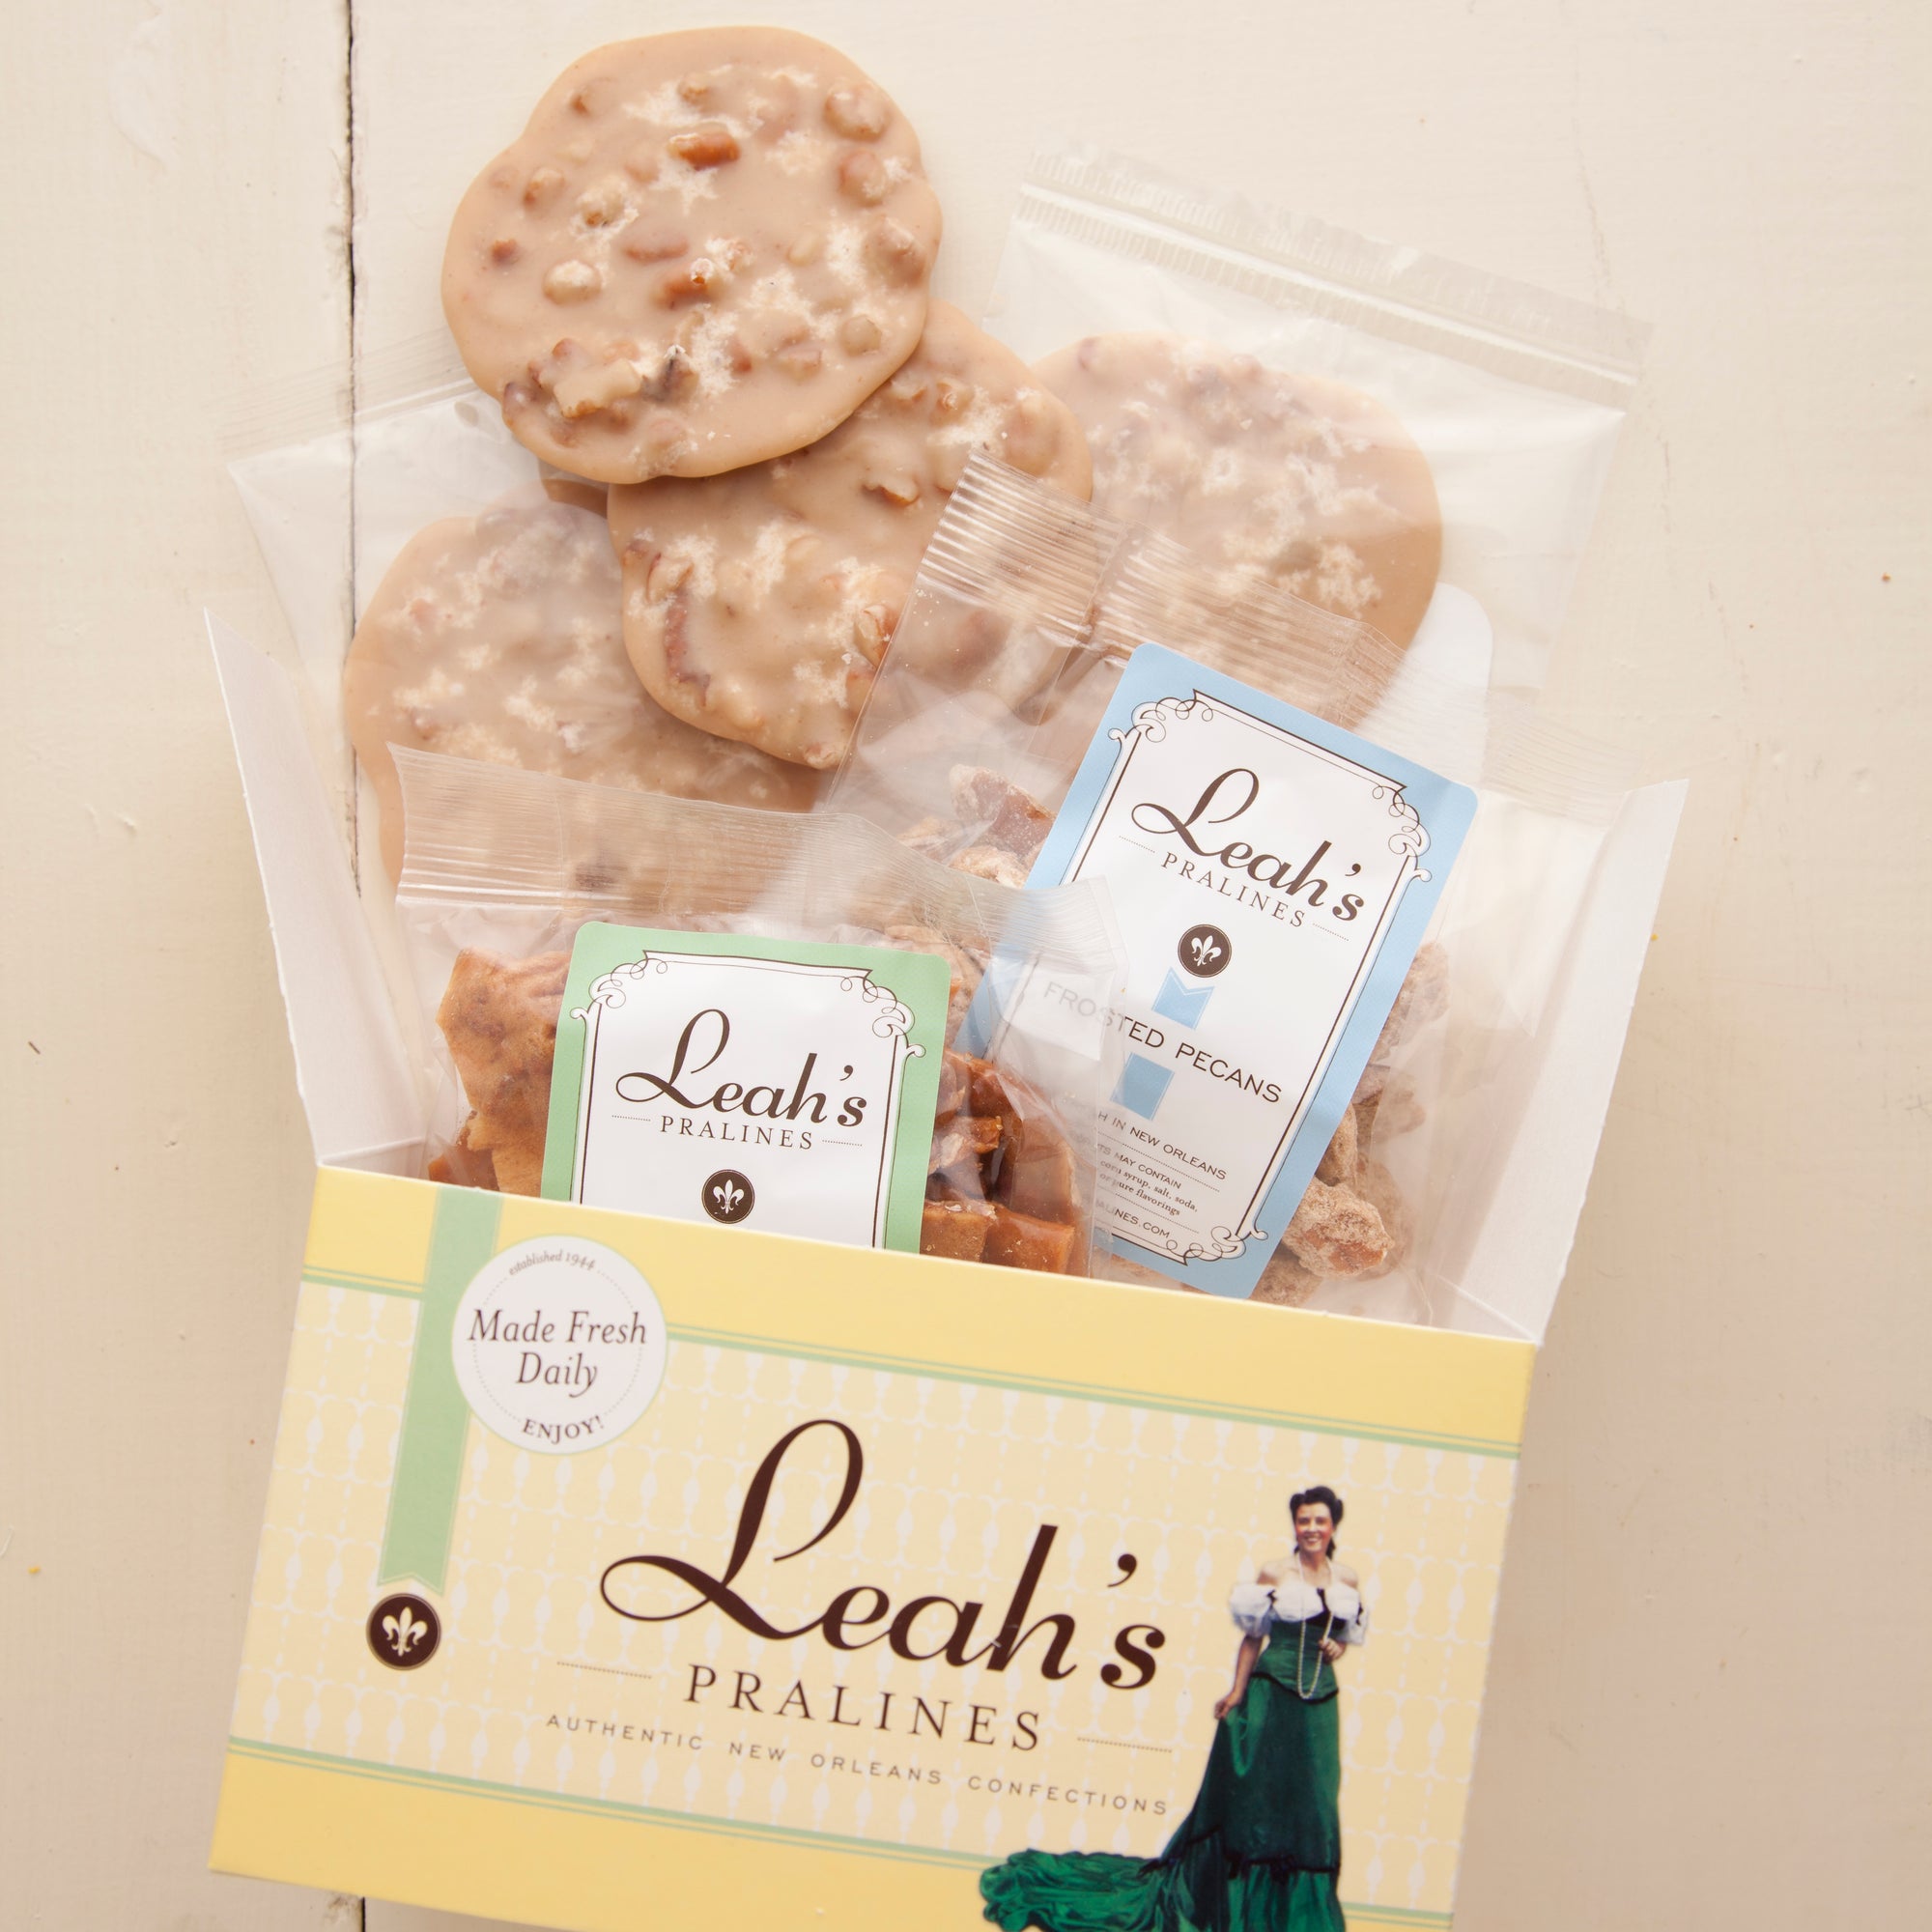 Creole Sampler gift box includes pralines, pecan brittle and frosted pecans